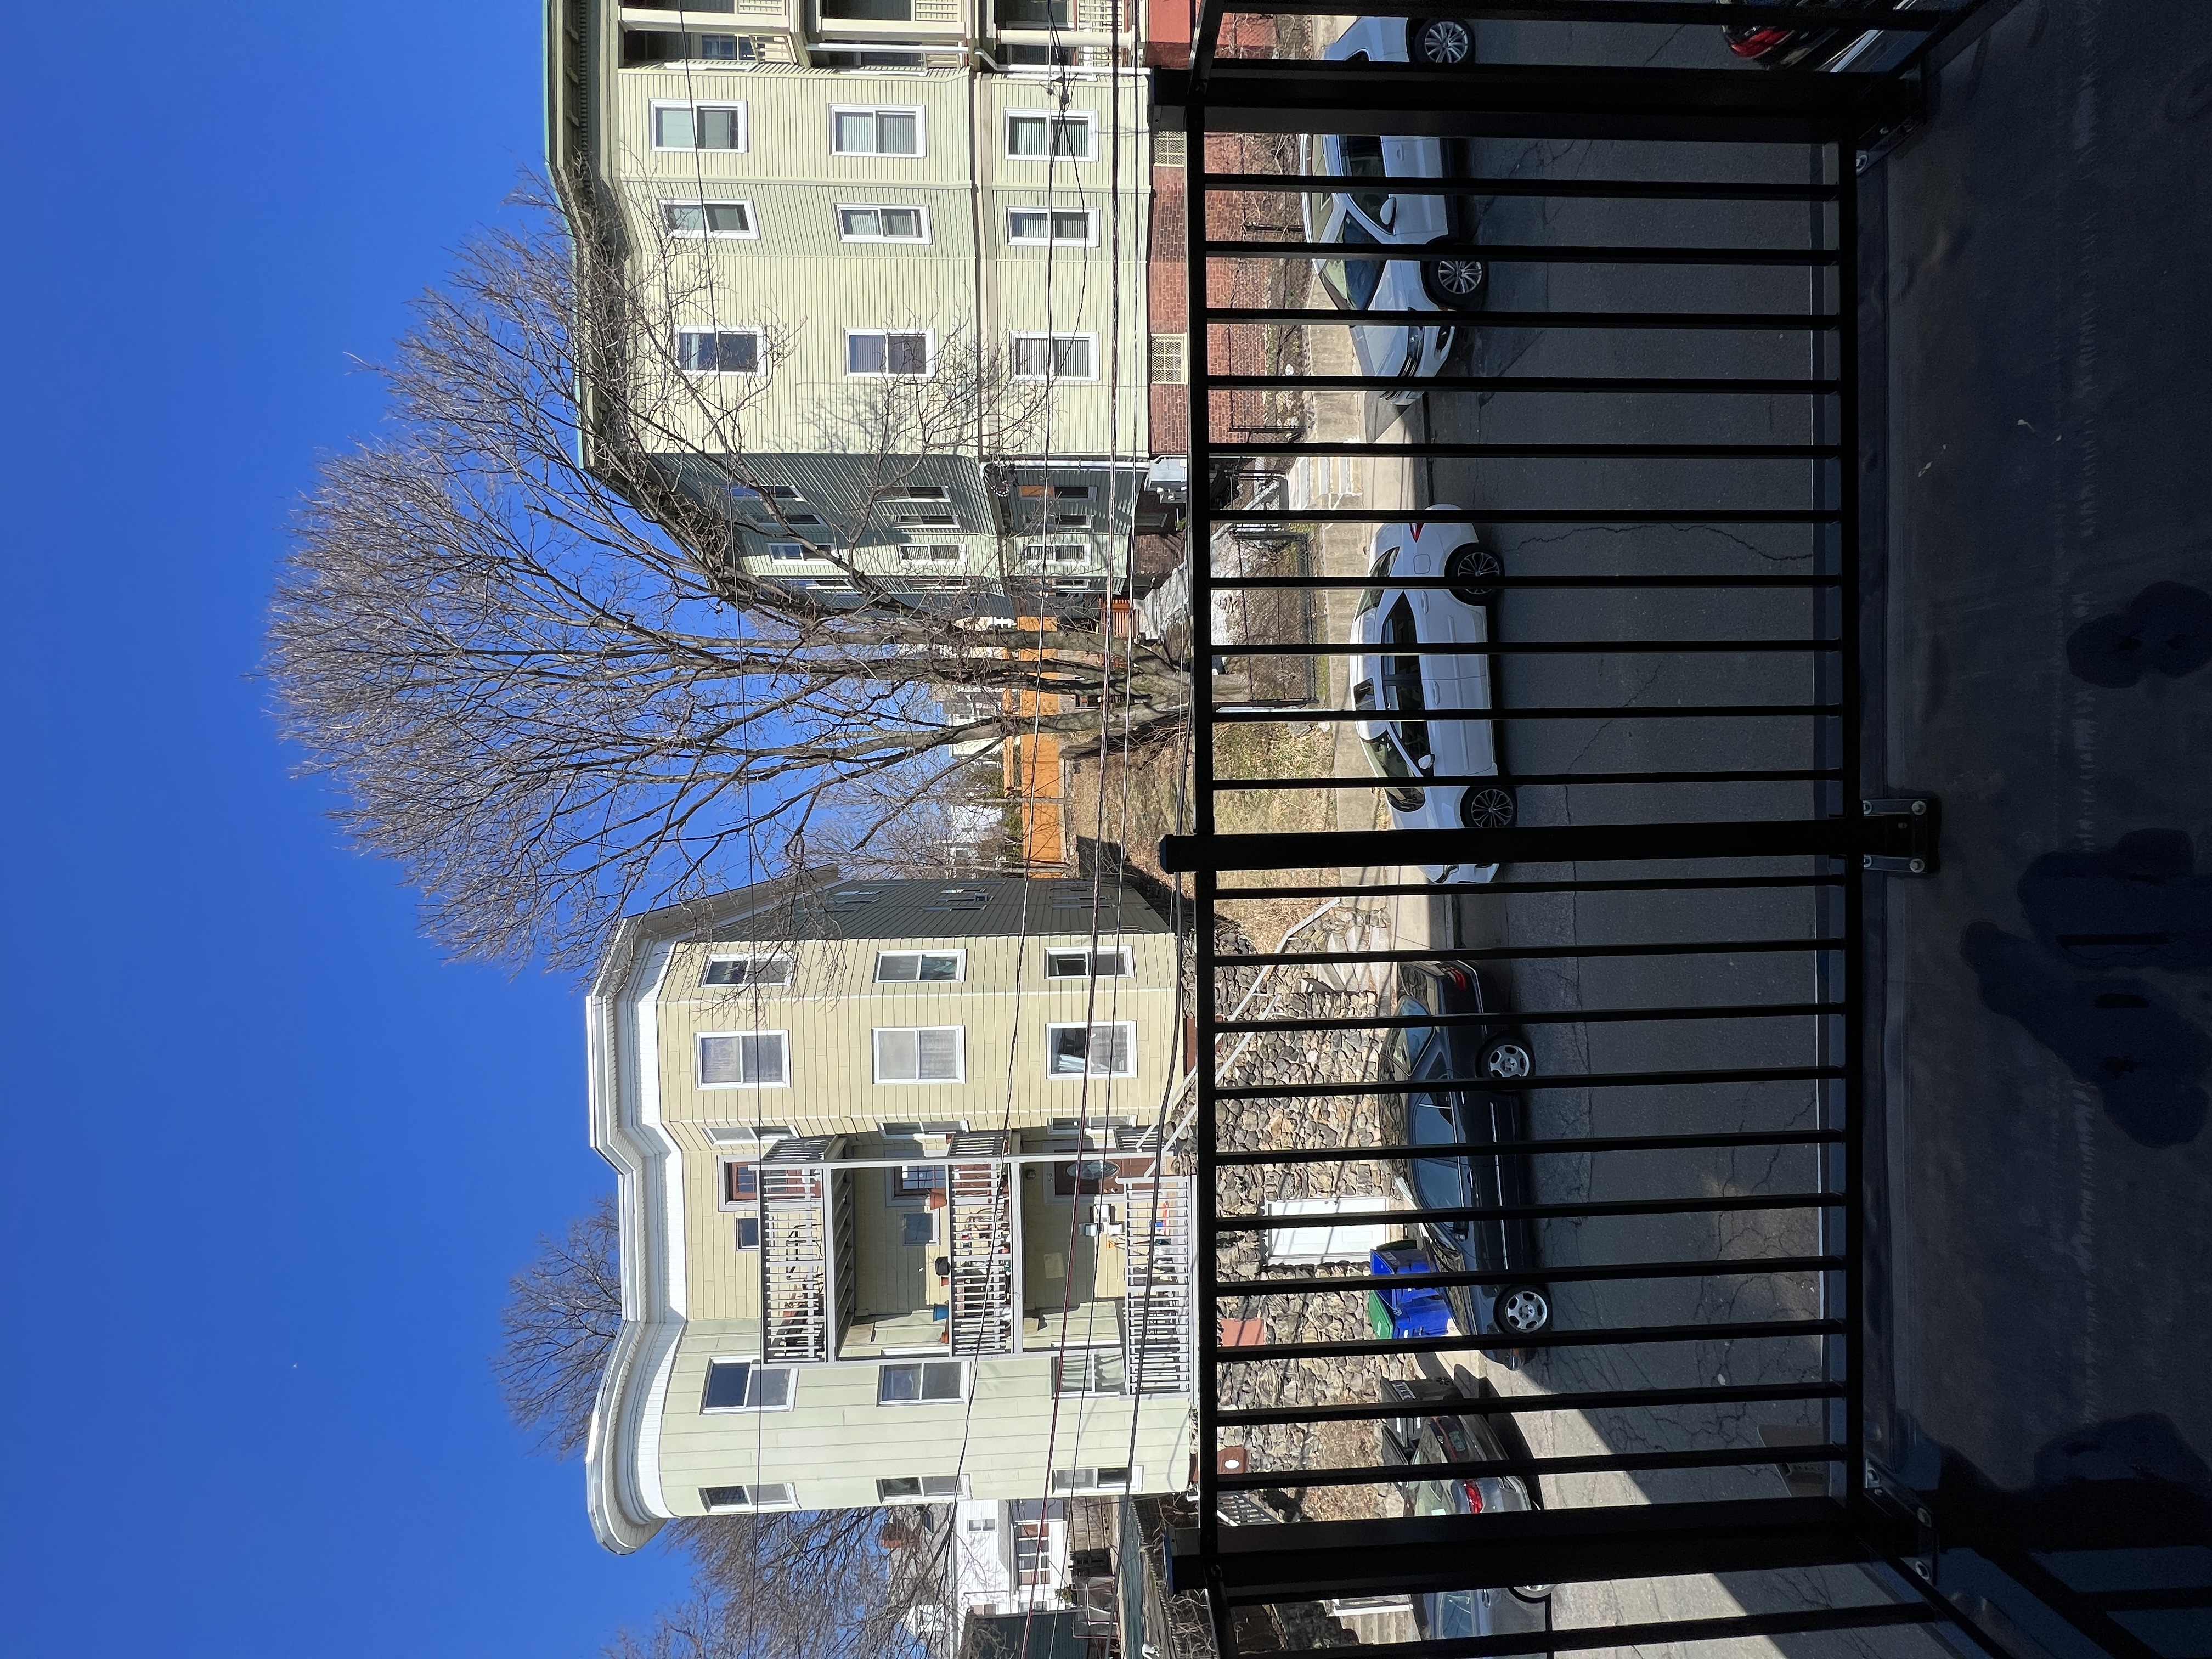 4 Beds, 1 Bath apartment in Somerville for $4,000